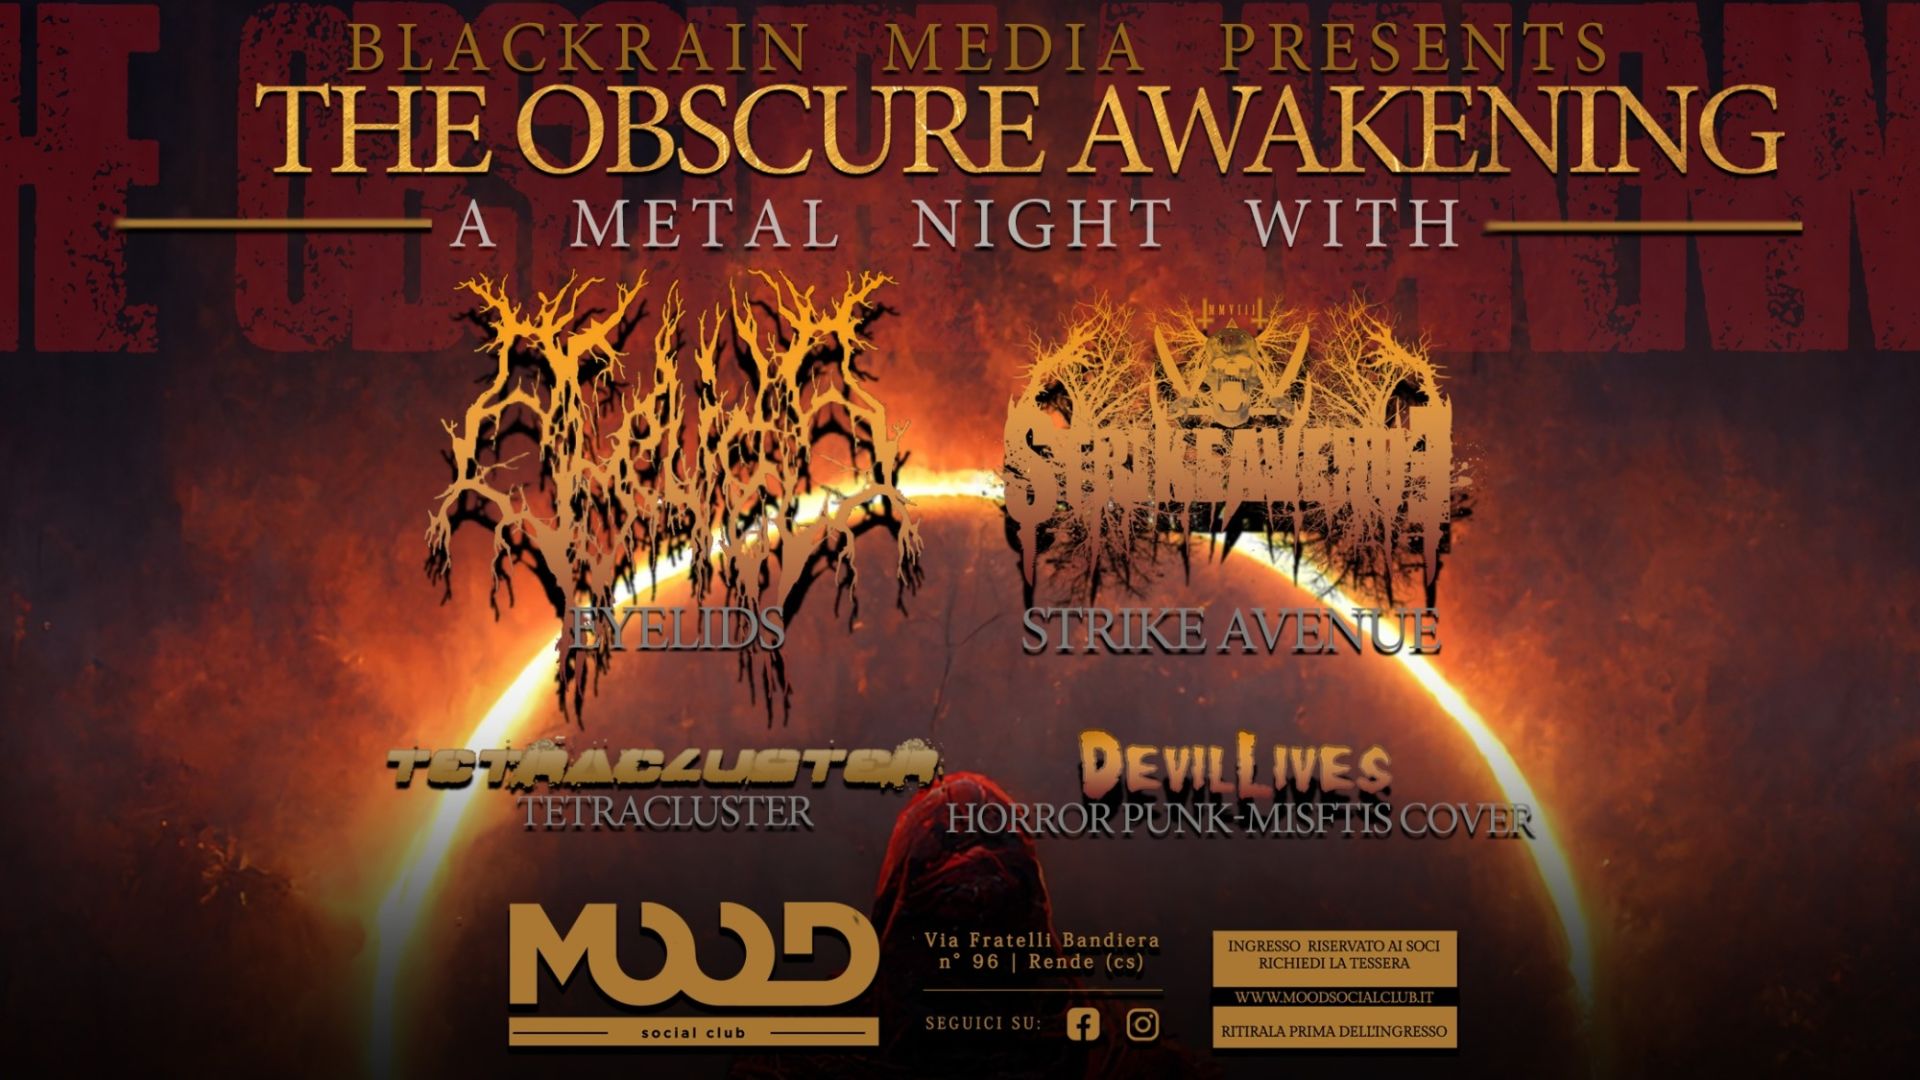 The Obscure Awakening - A Metal Night